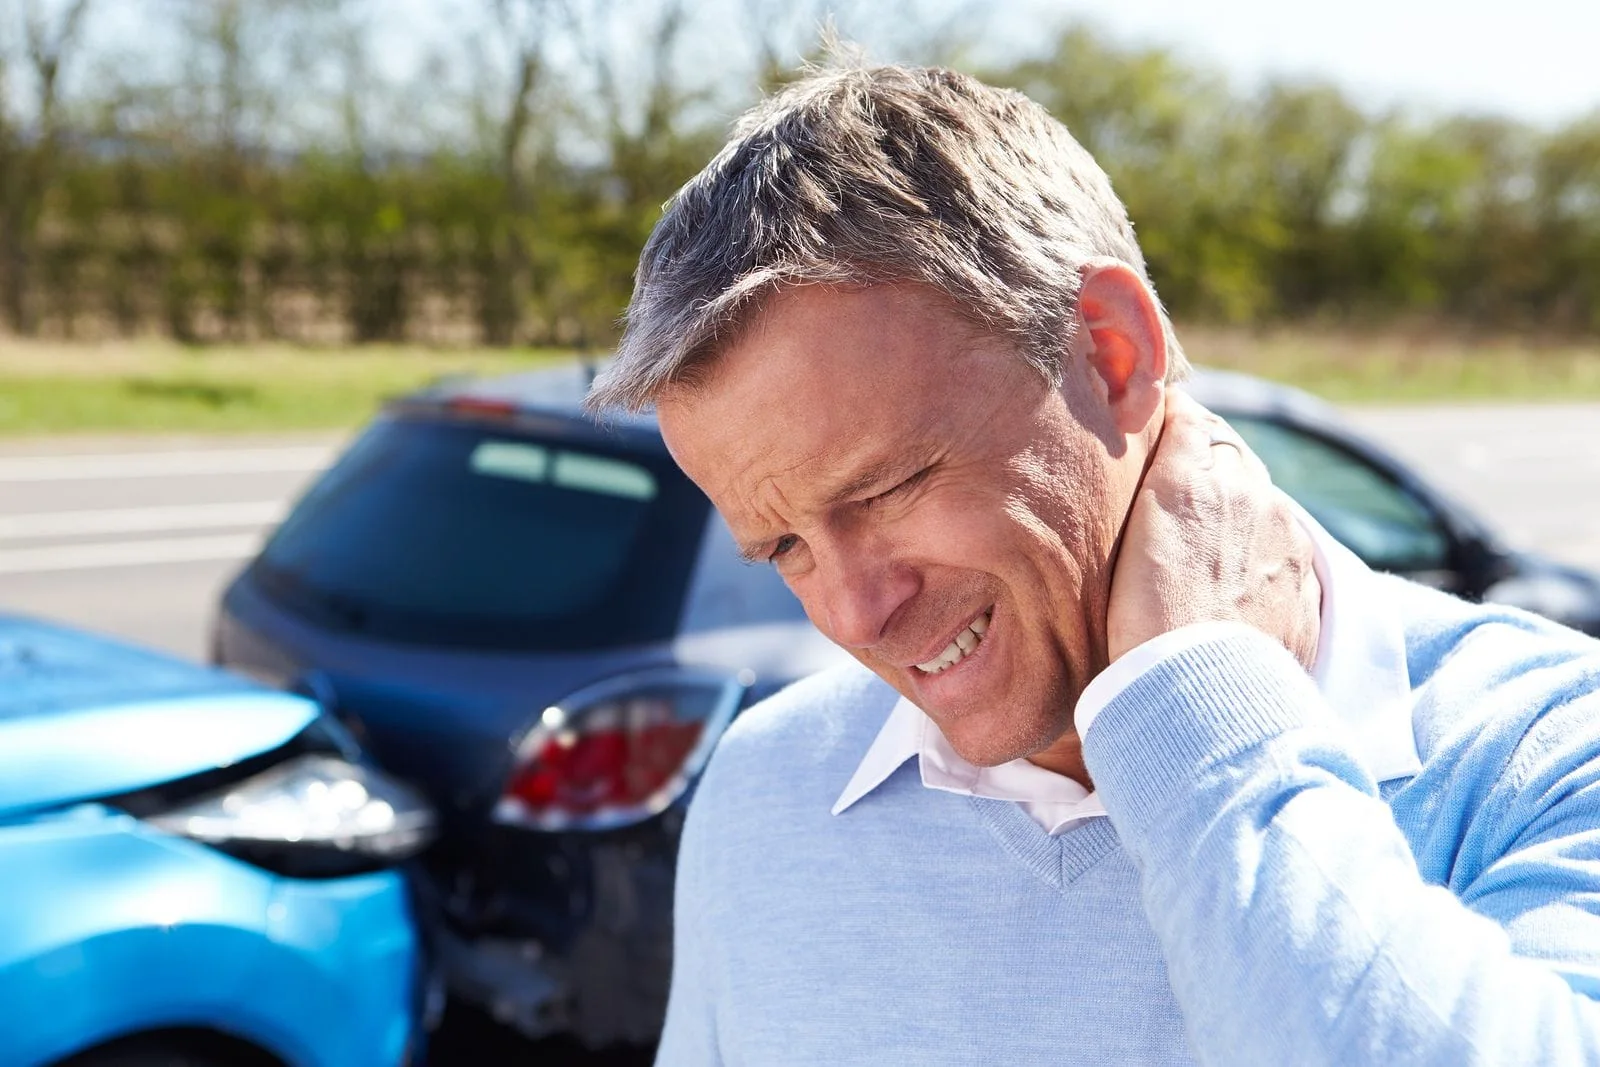 Tulsa Neck Pain from Auto Accidents